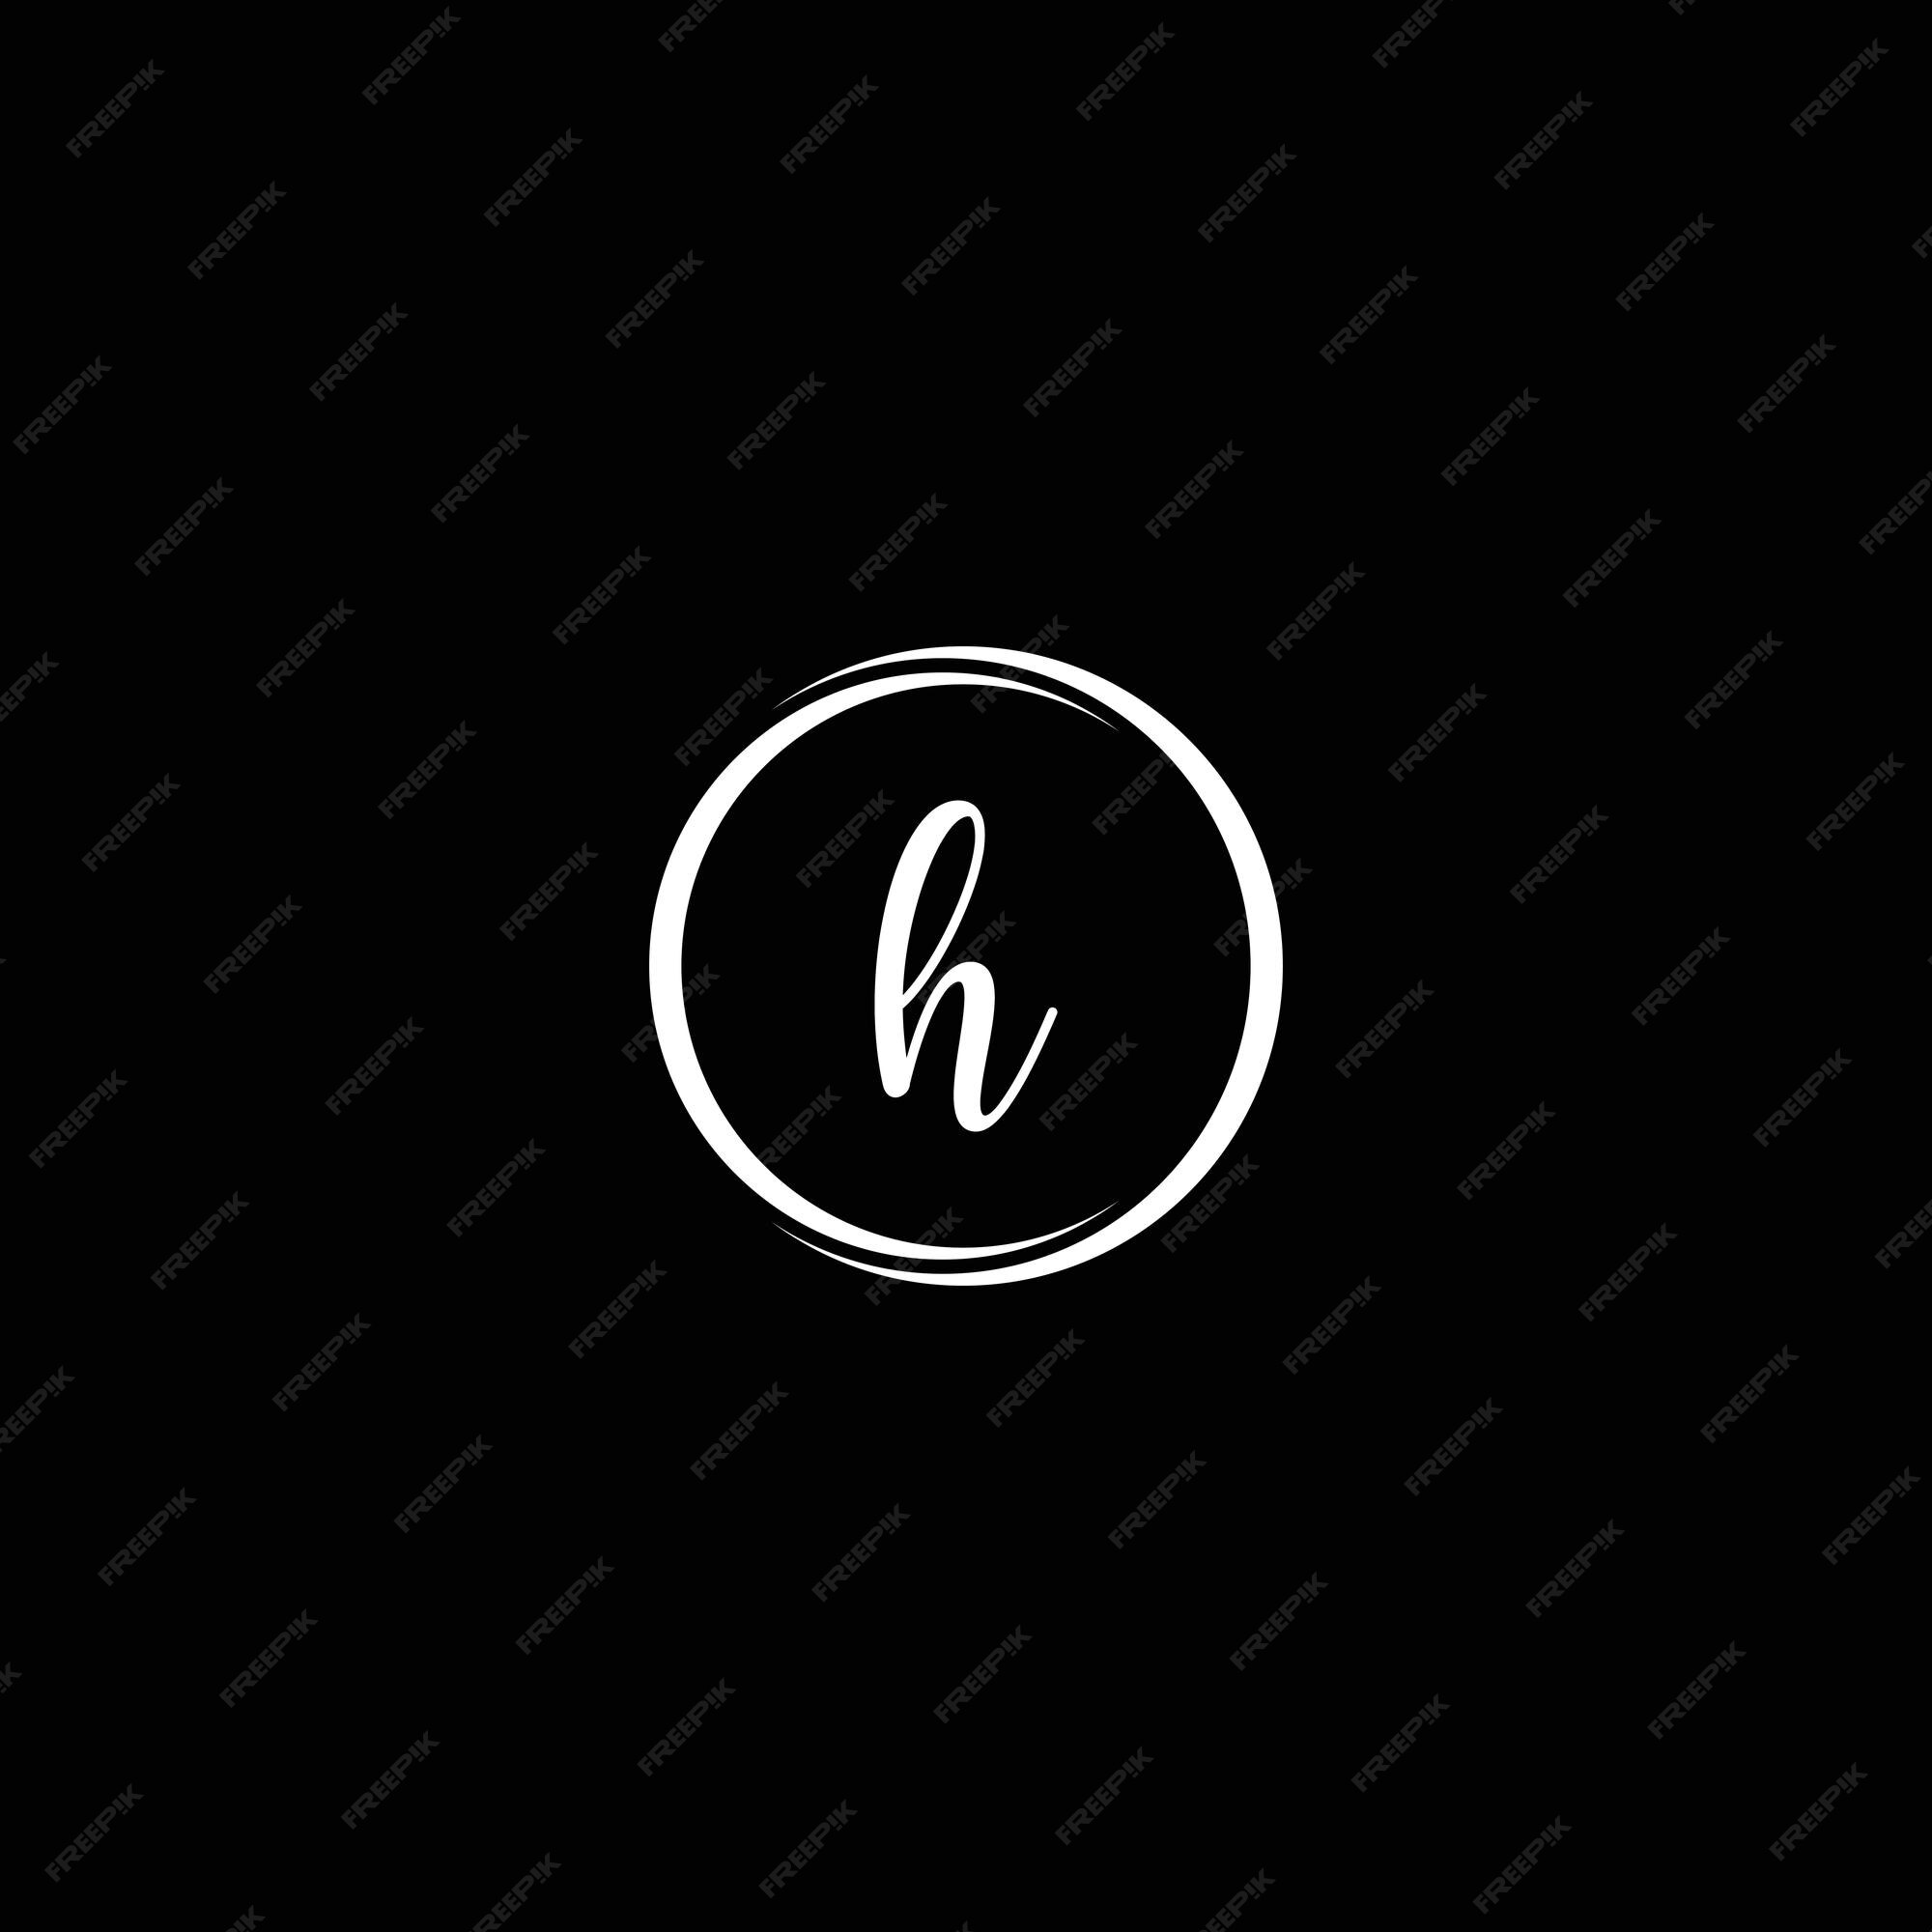 Premium Vector | Simple white letter h logo with ring and black background